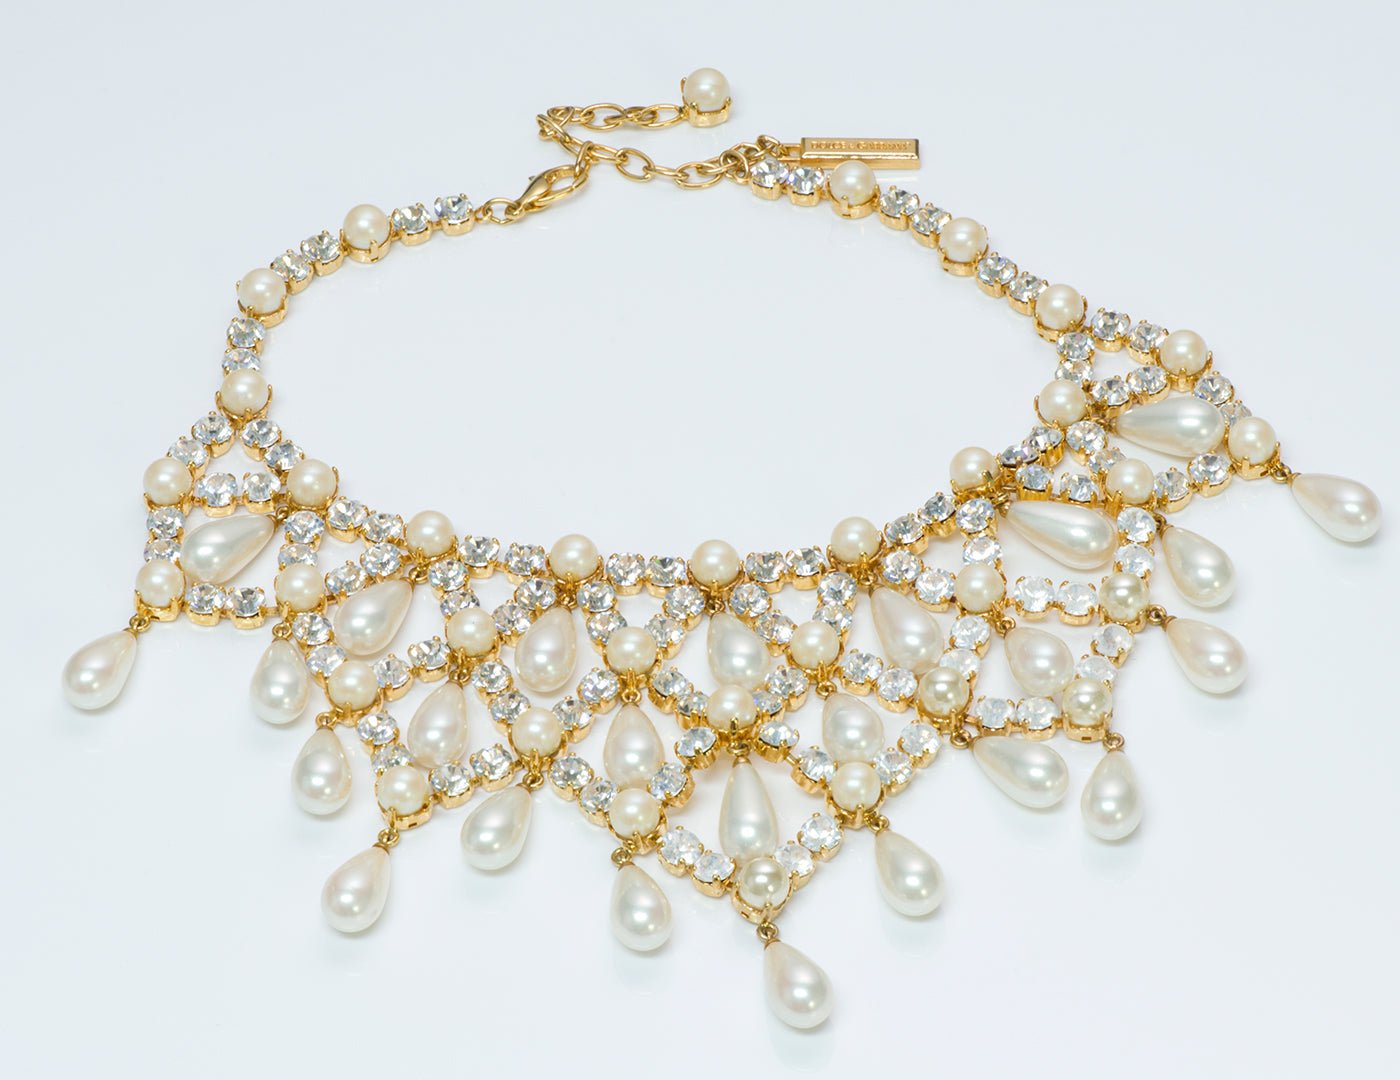 Dolce & Gabbana Crystal Pearl Necklace - DSF Antique Jewelry